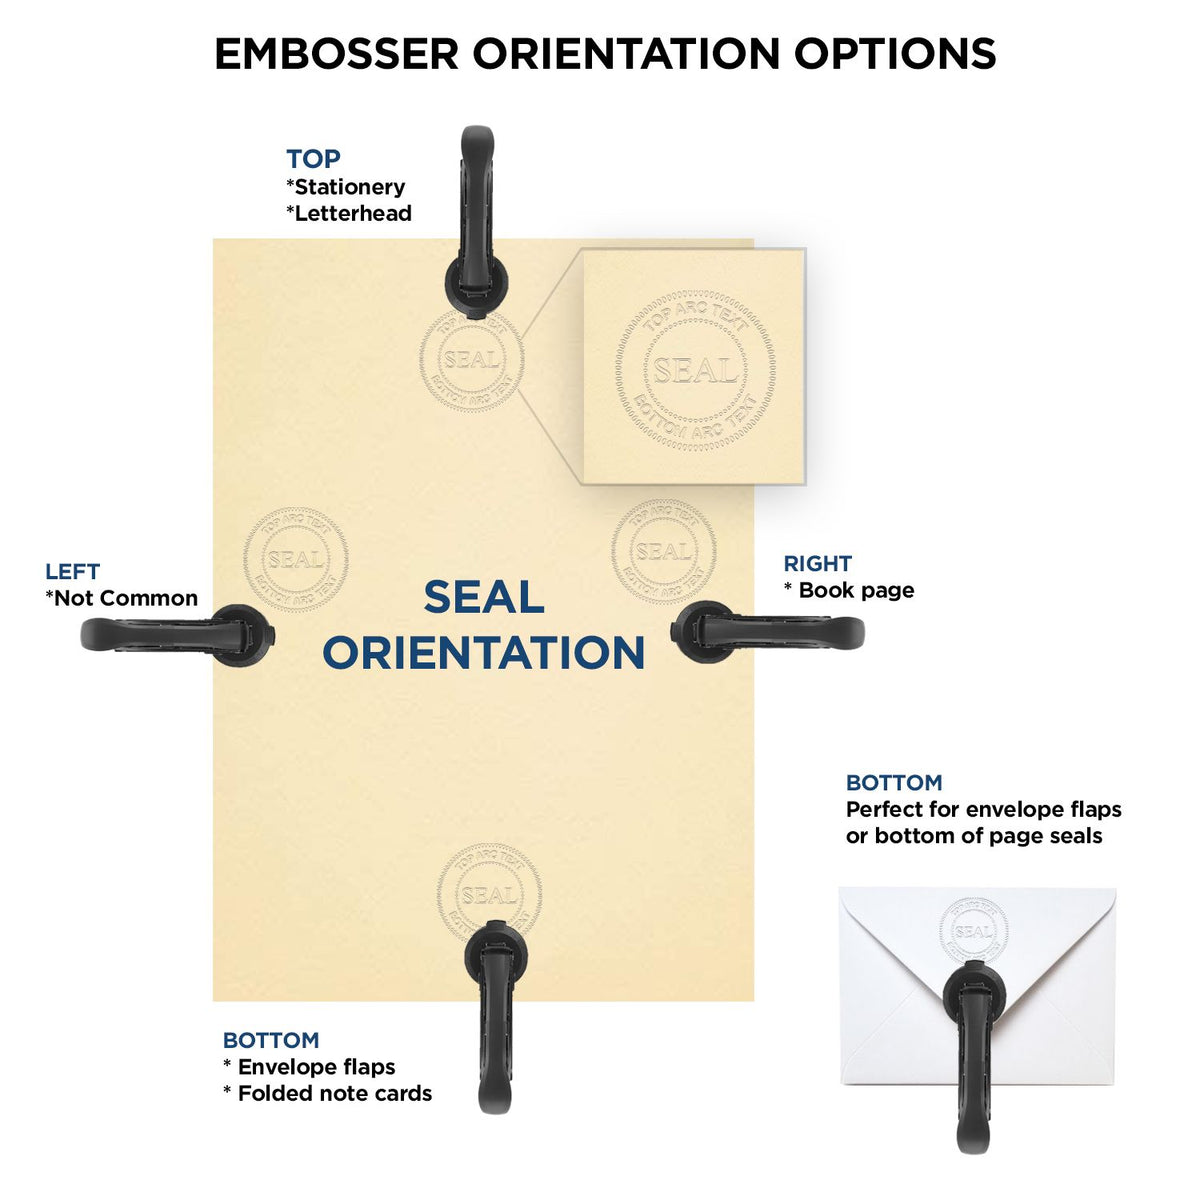 An infographic for the Hybrid Massachusetts Land Surveyor Seal showing embosser orientation, this is showing examples of a top, bottom, right and left insert.